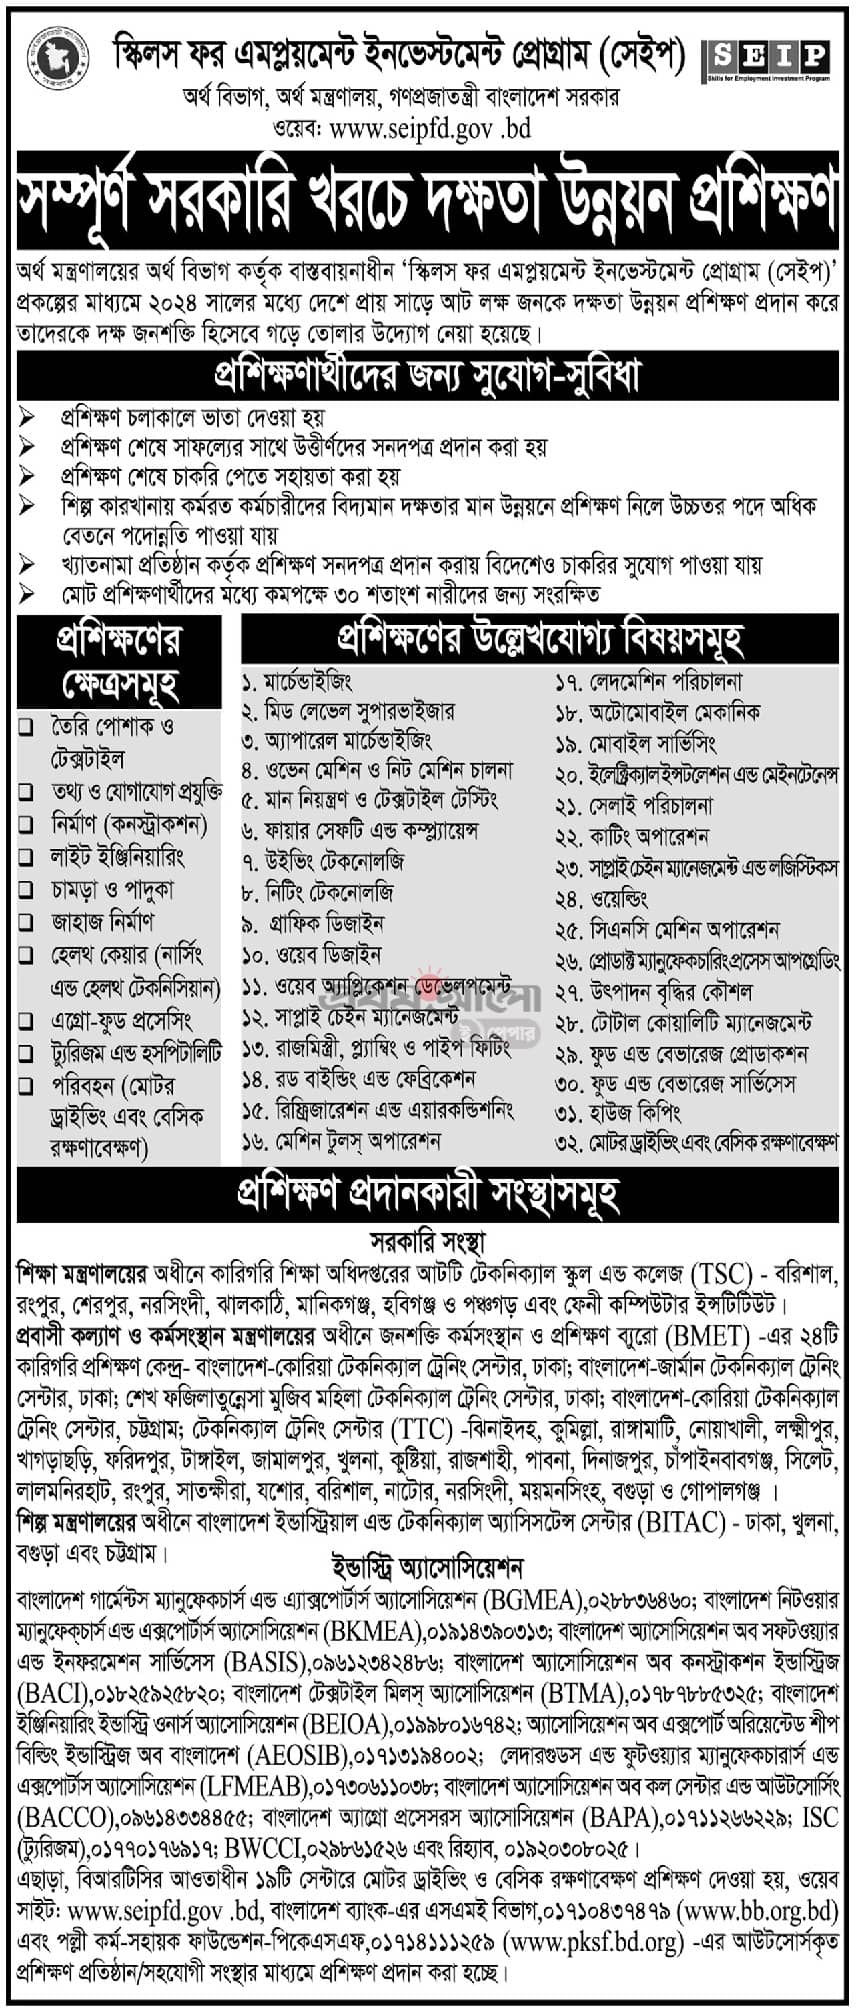 Free Training Courses in Bangladesh 